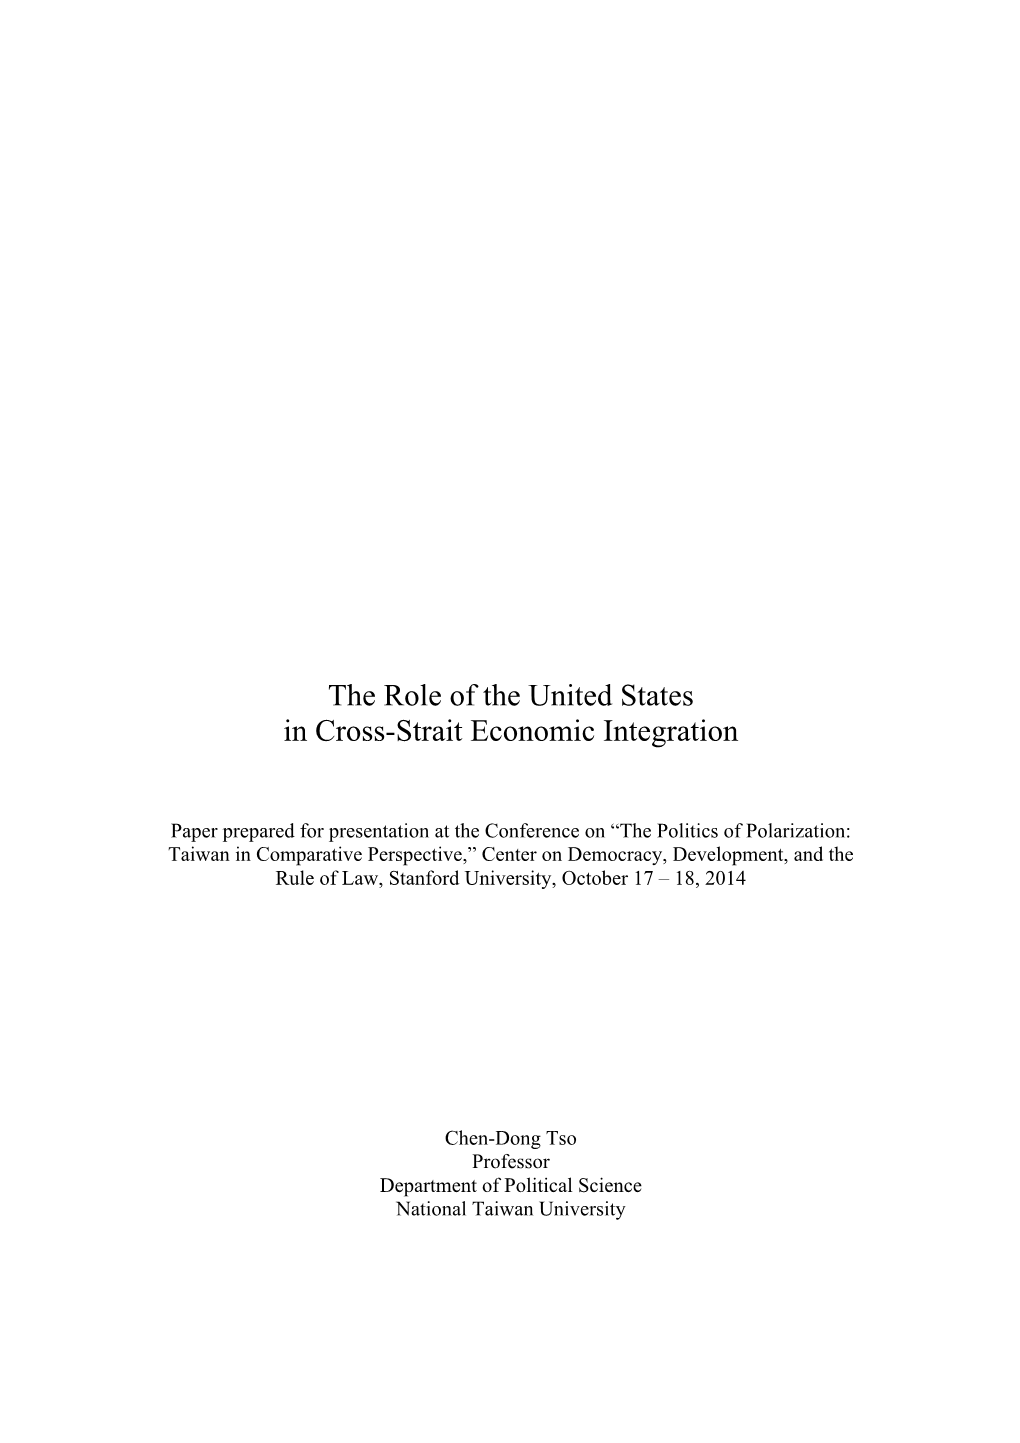 The Role of the United States in Cross-Strait Economic Integration